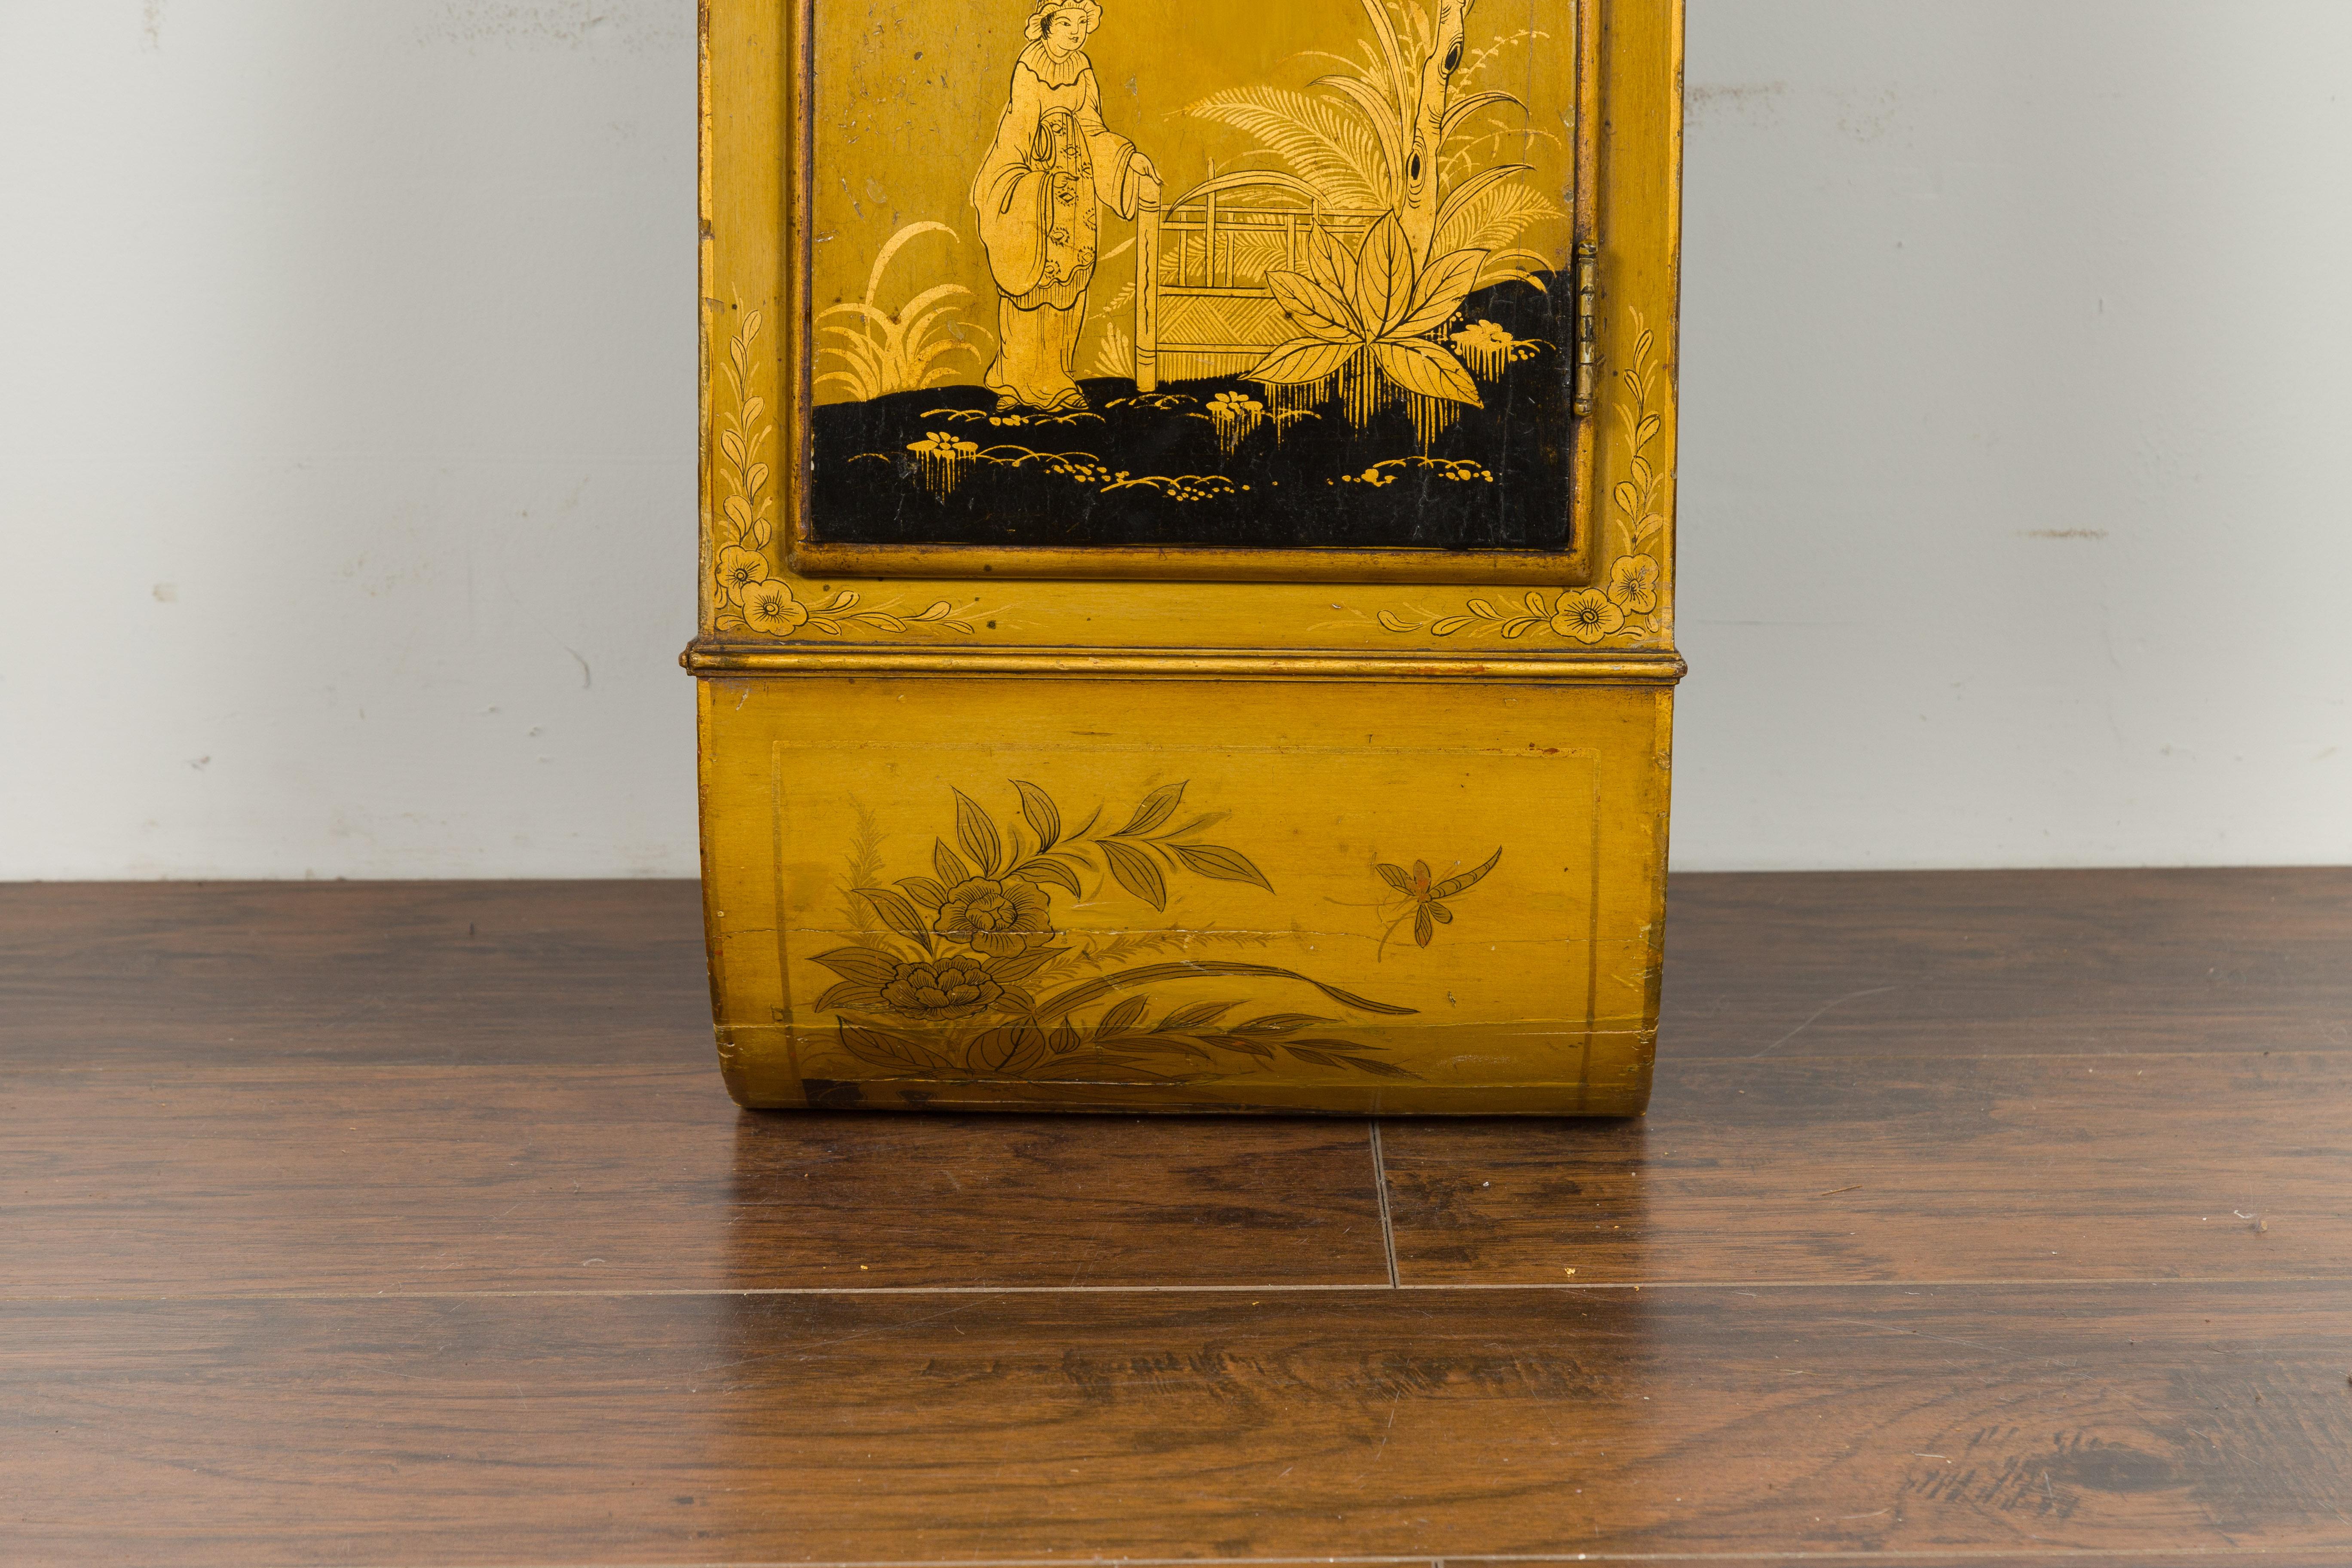 Wood English Regency Period 1820s Golden Toned Wall Clock with Chinoiserie Décor For Sale